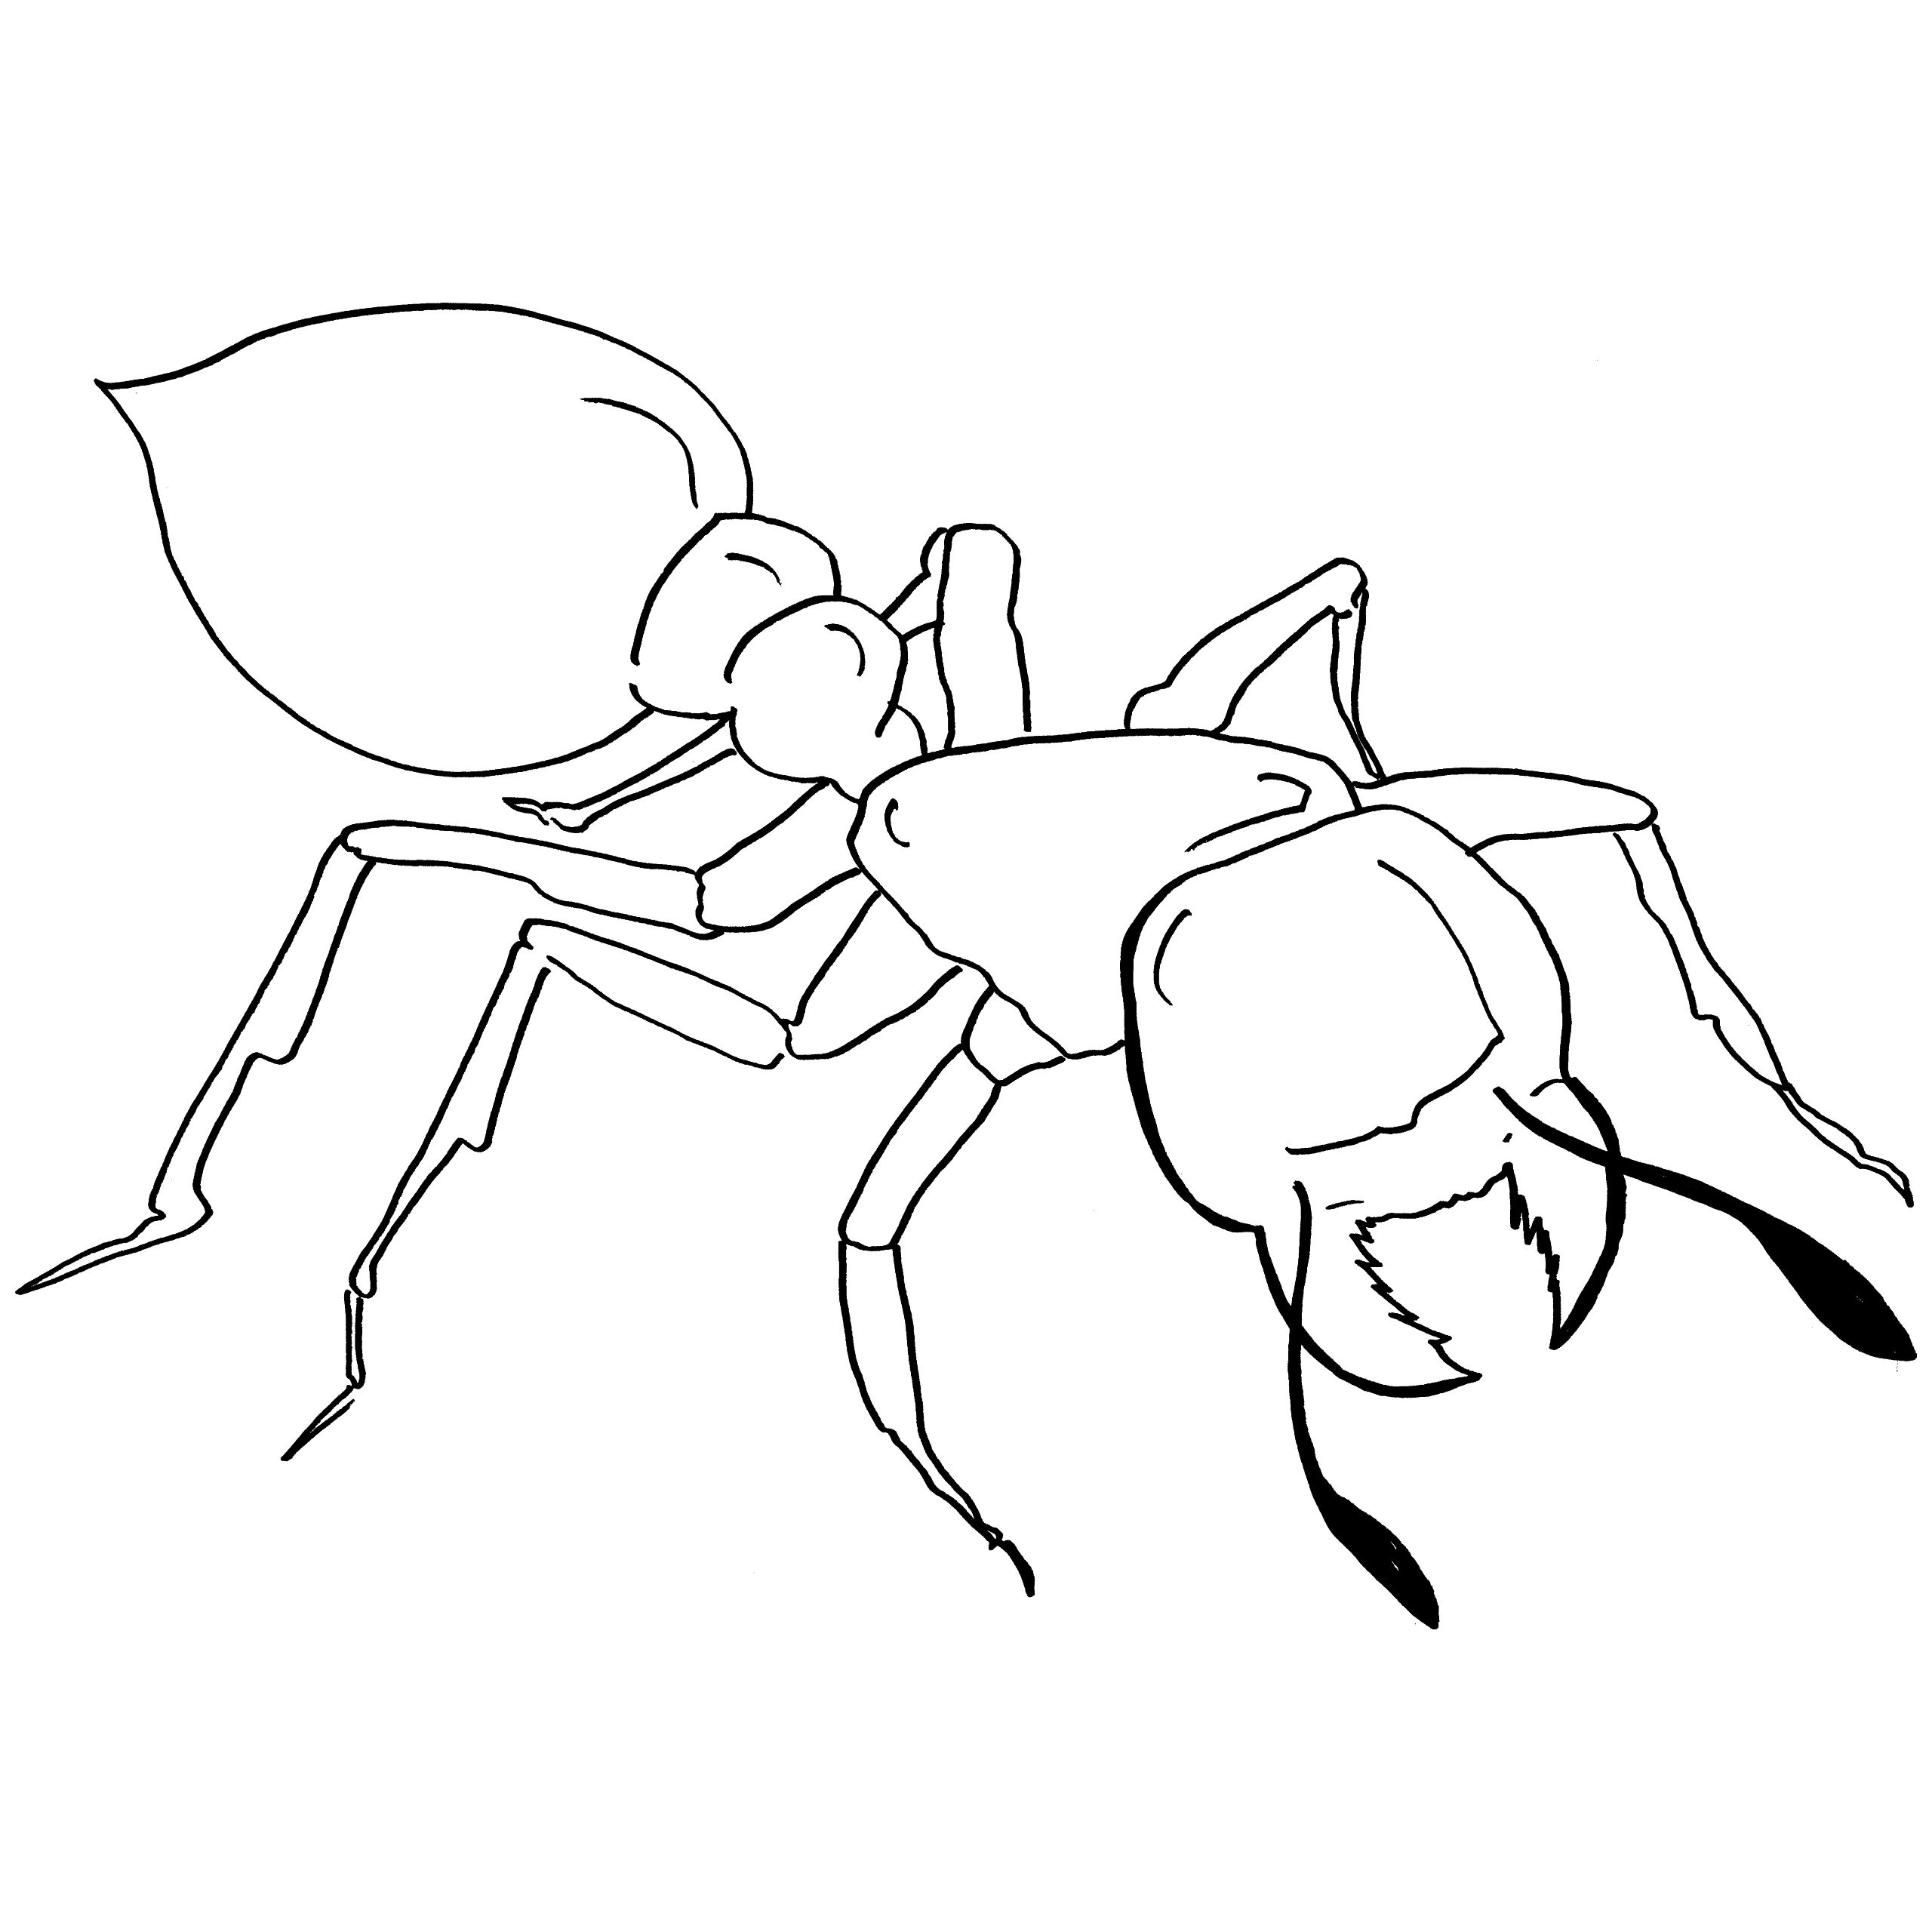 Line drawing at getdrawings. Ant clipart bullet ant